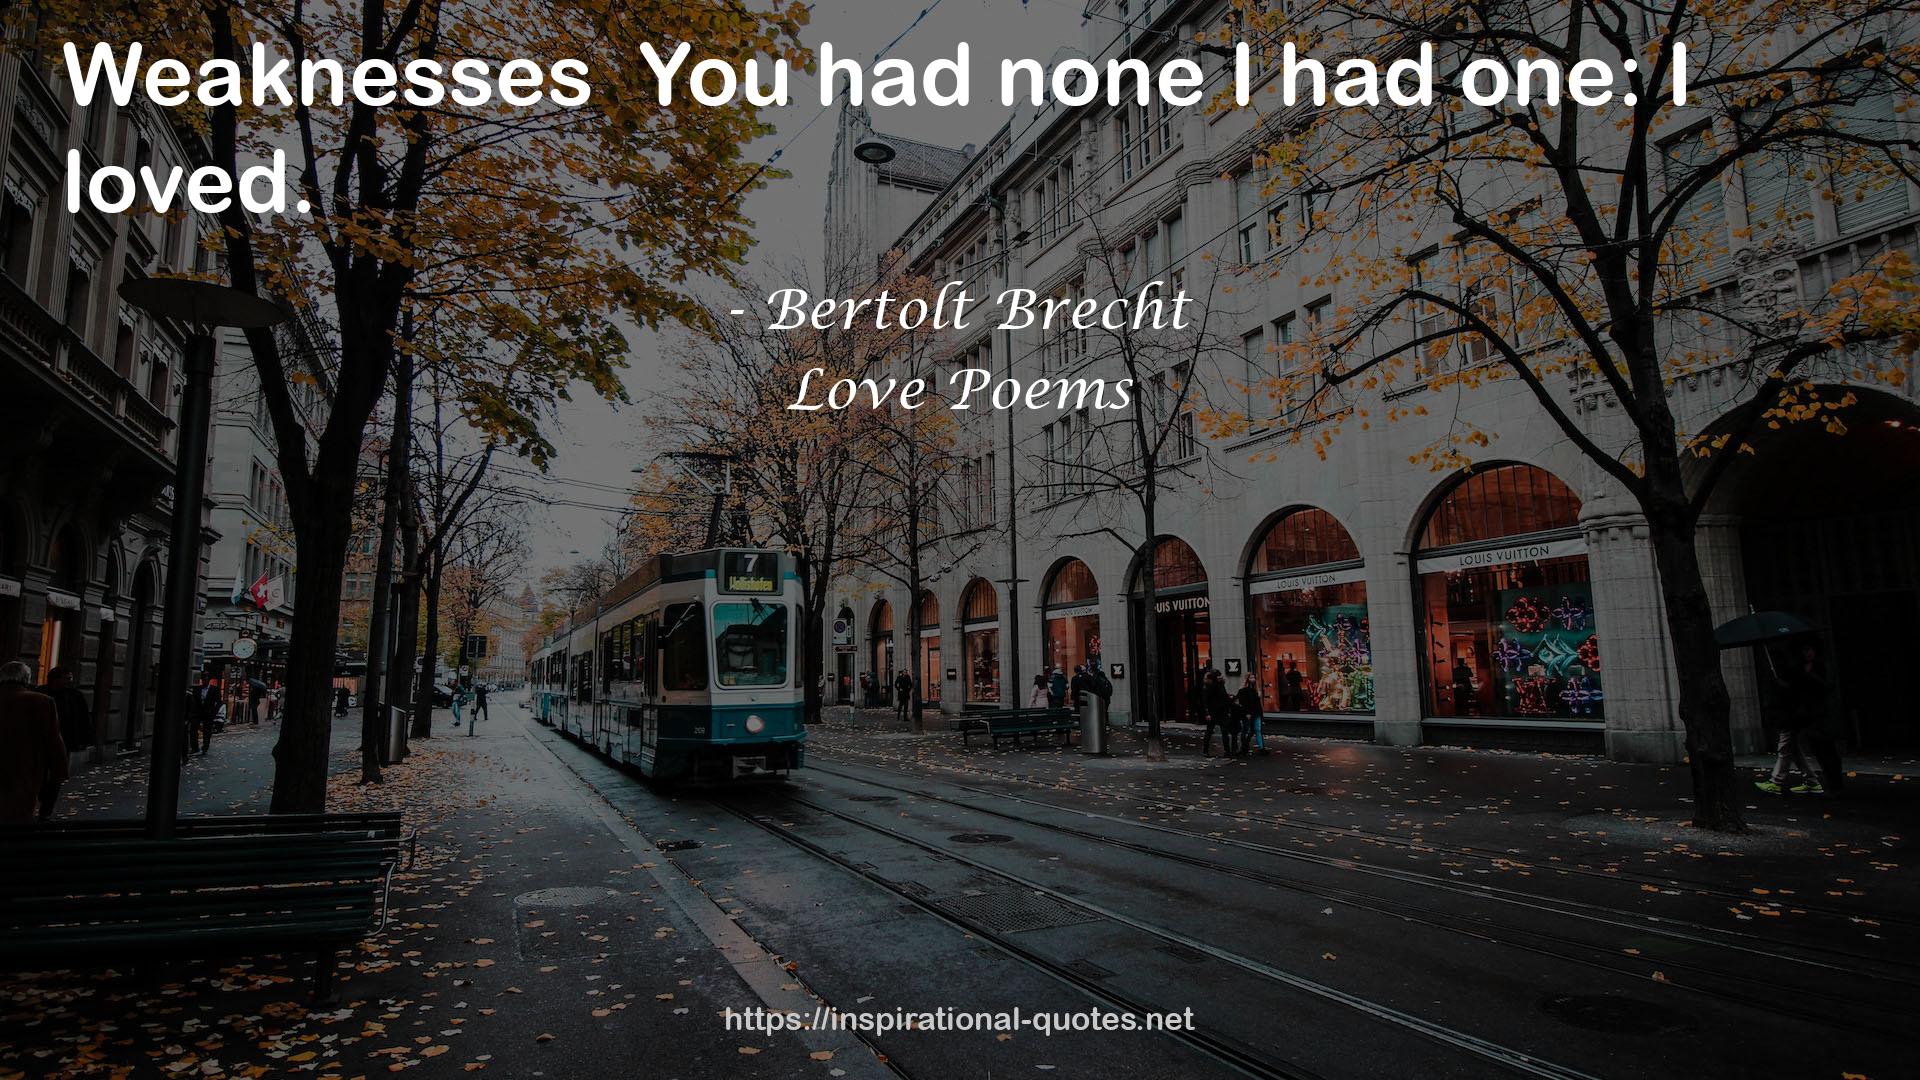 Love Poems QUOTES